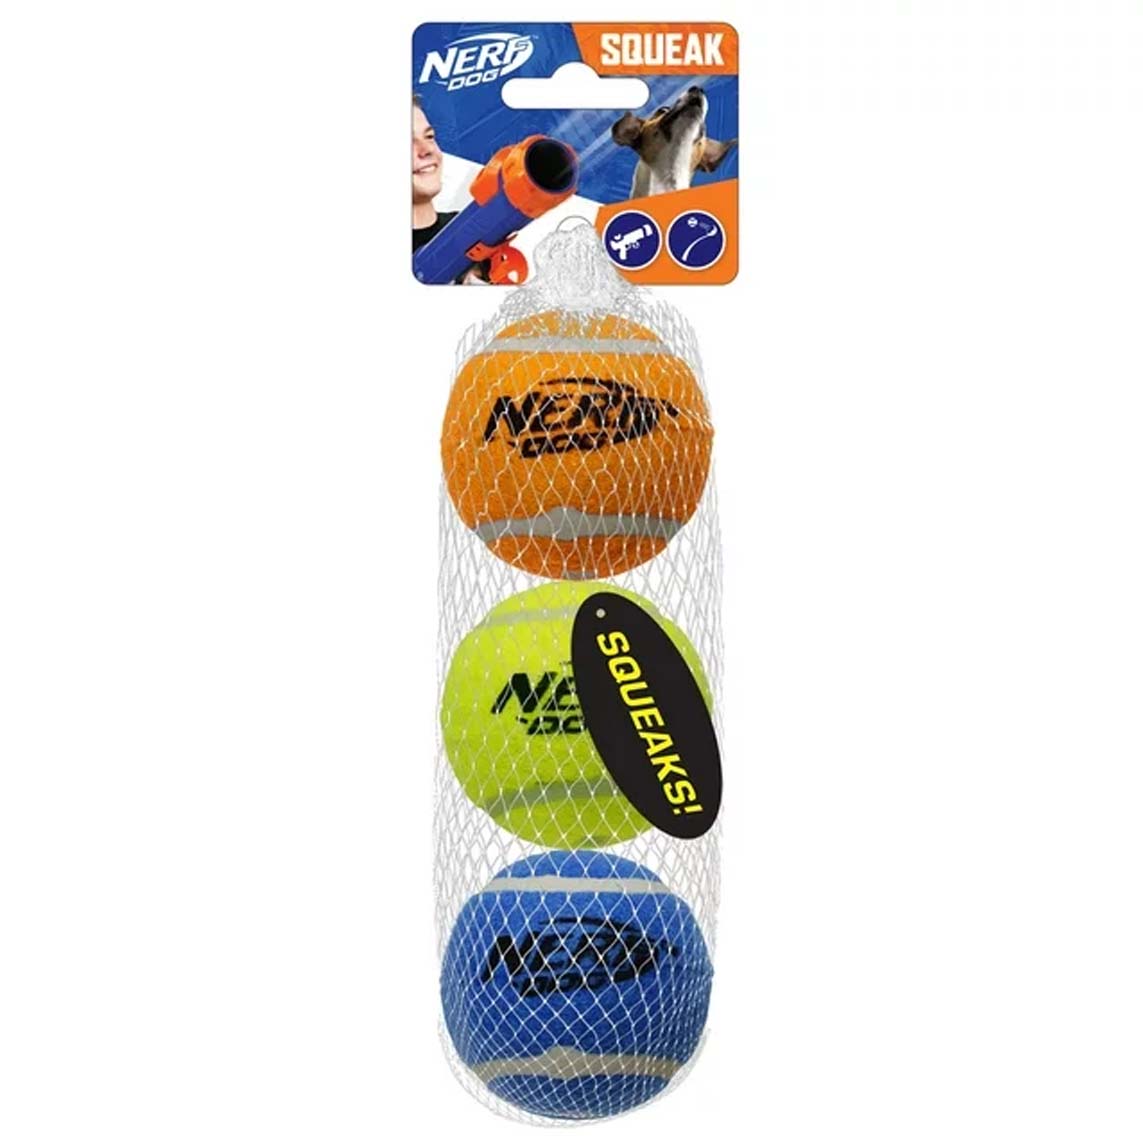 Nerf Dog 2.5-inch Squeak Tennis Ball Dog Toy, 3-Pack in orange, lime and blue